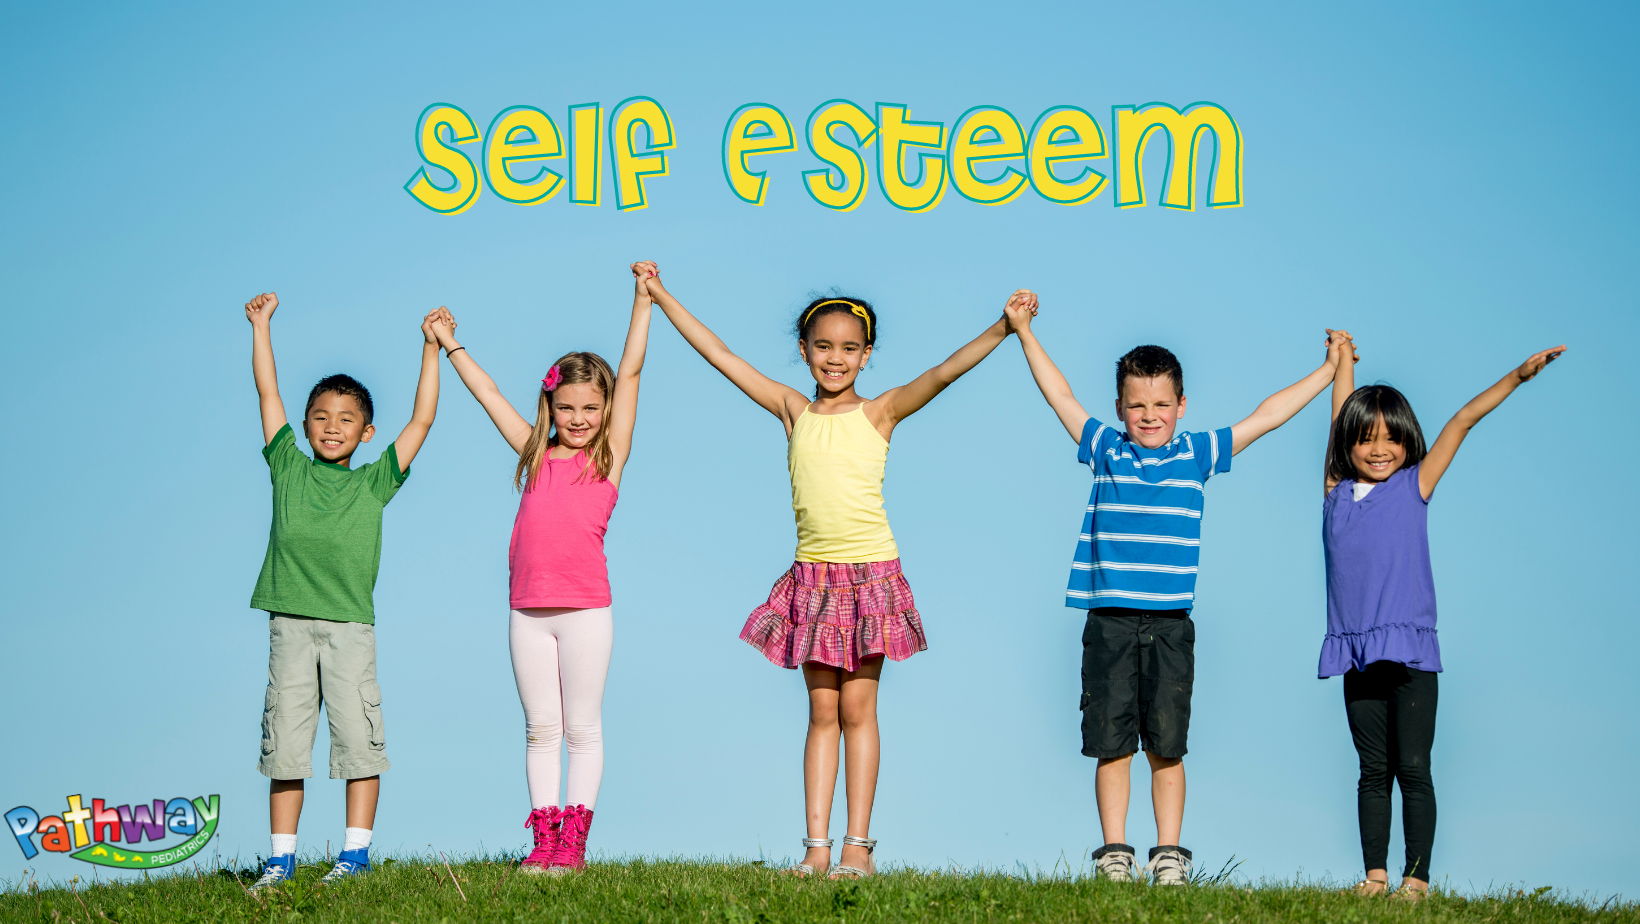 Helping Your Child Develop A Healthy Sense of Self Esteem